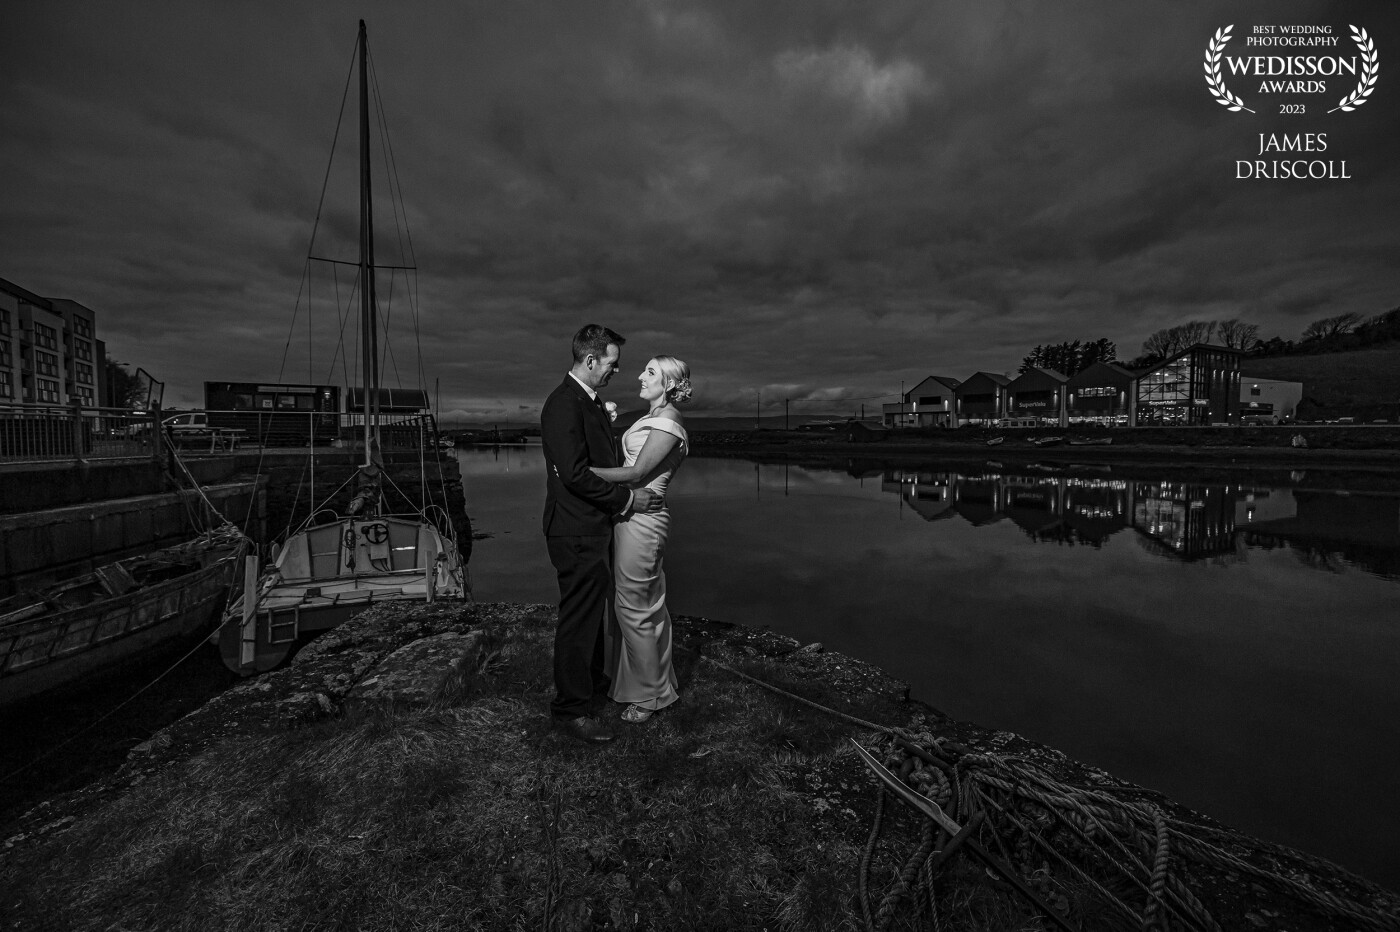 Tracy & Tomas in Bantry,, directly across from the martime hotel, late evening, One flash with magsphere,grid and ad200